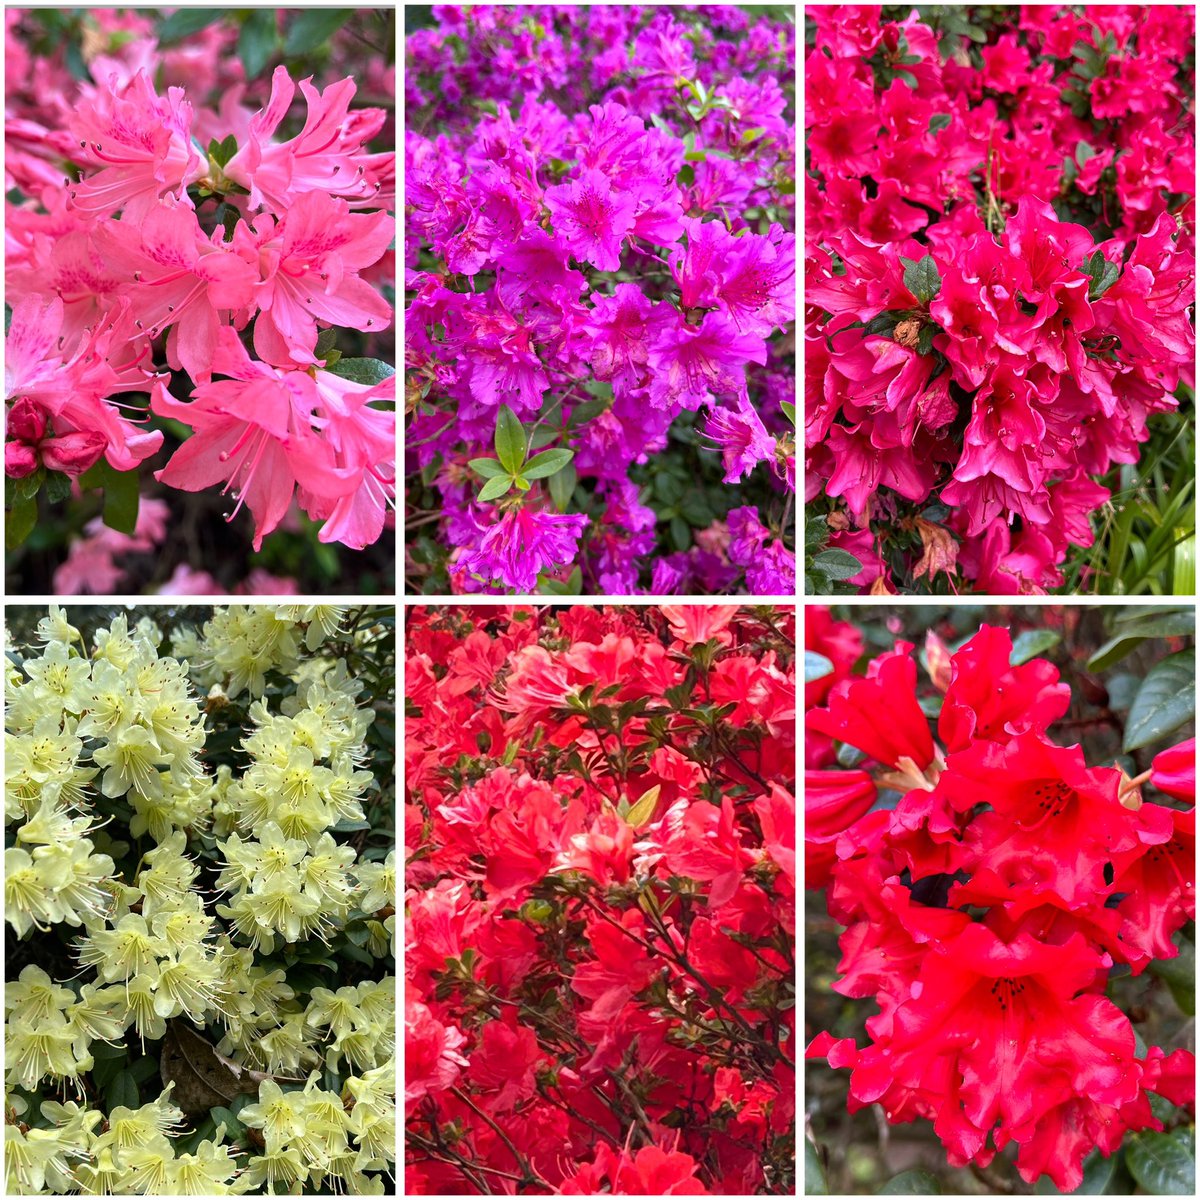 April is about the Azaleas @GardensHour, what a display they’ve put on this year #GardensHour